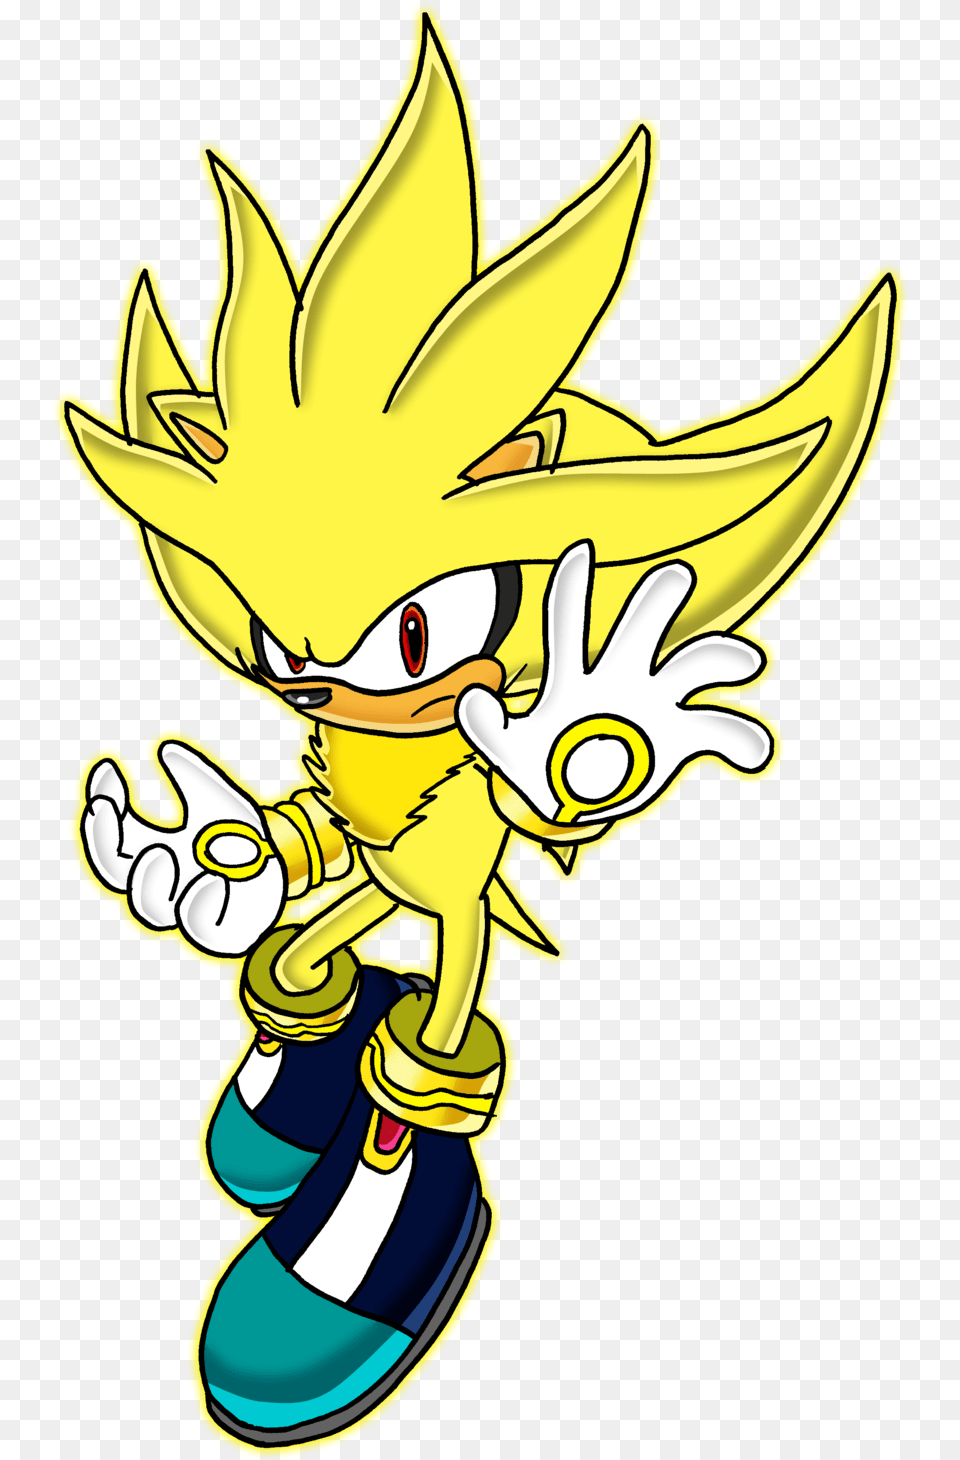 Silver The Hedgehog Images Super Silver Drawing Hd Silver The Hedgehog Cartoon, Book, Comics, Publication, Baby Free Png Download